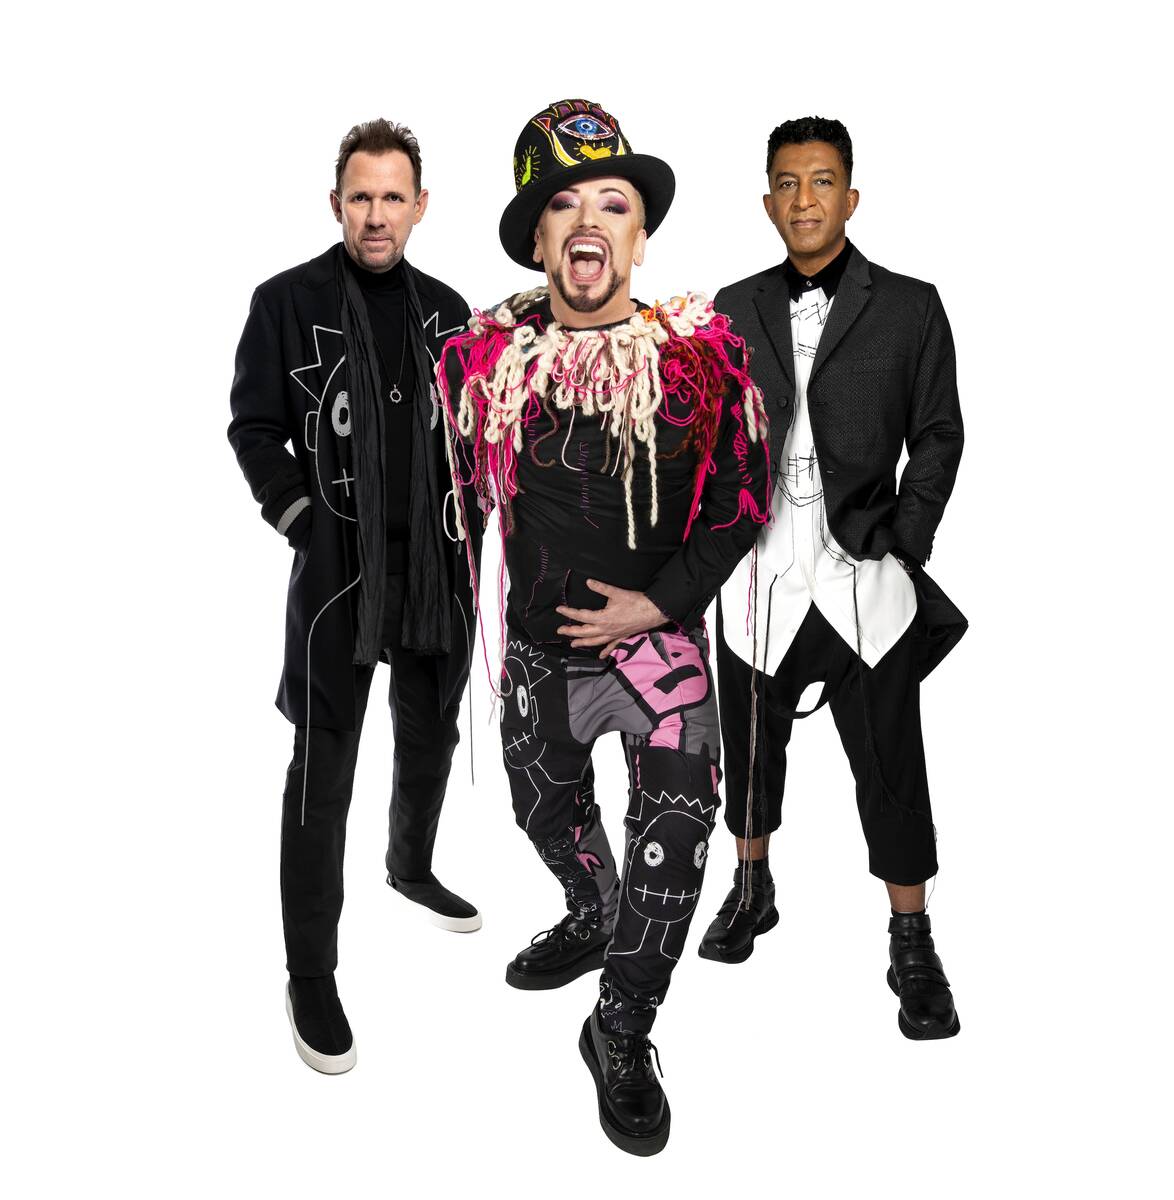 The latest version of Boy George and the Culture club, with keyboardist Roy Hay, left, and bass ...